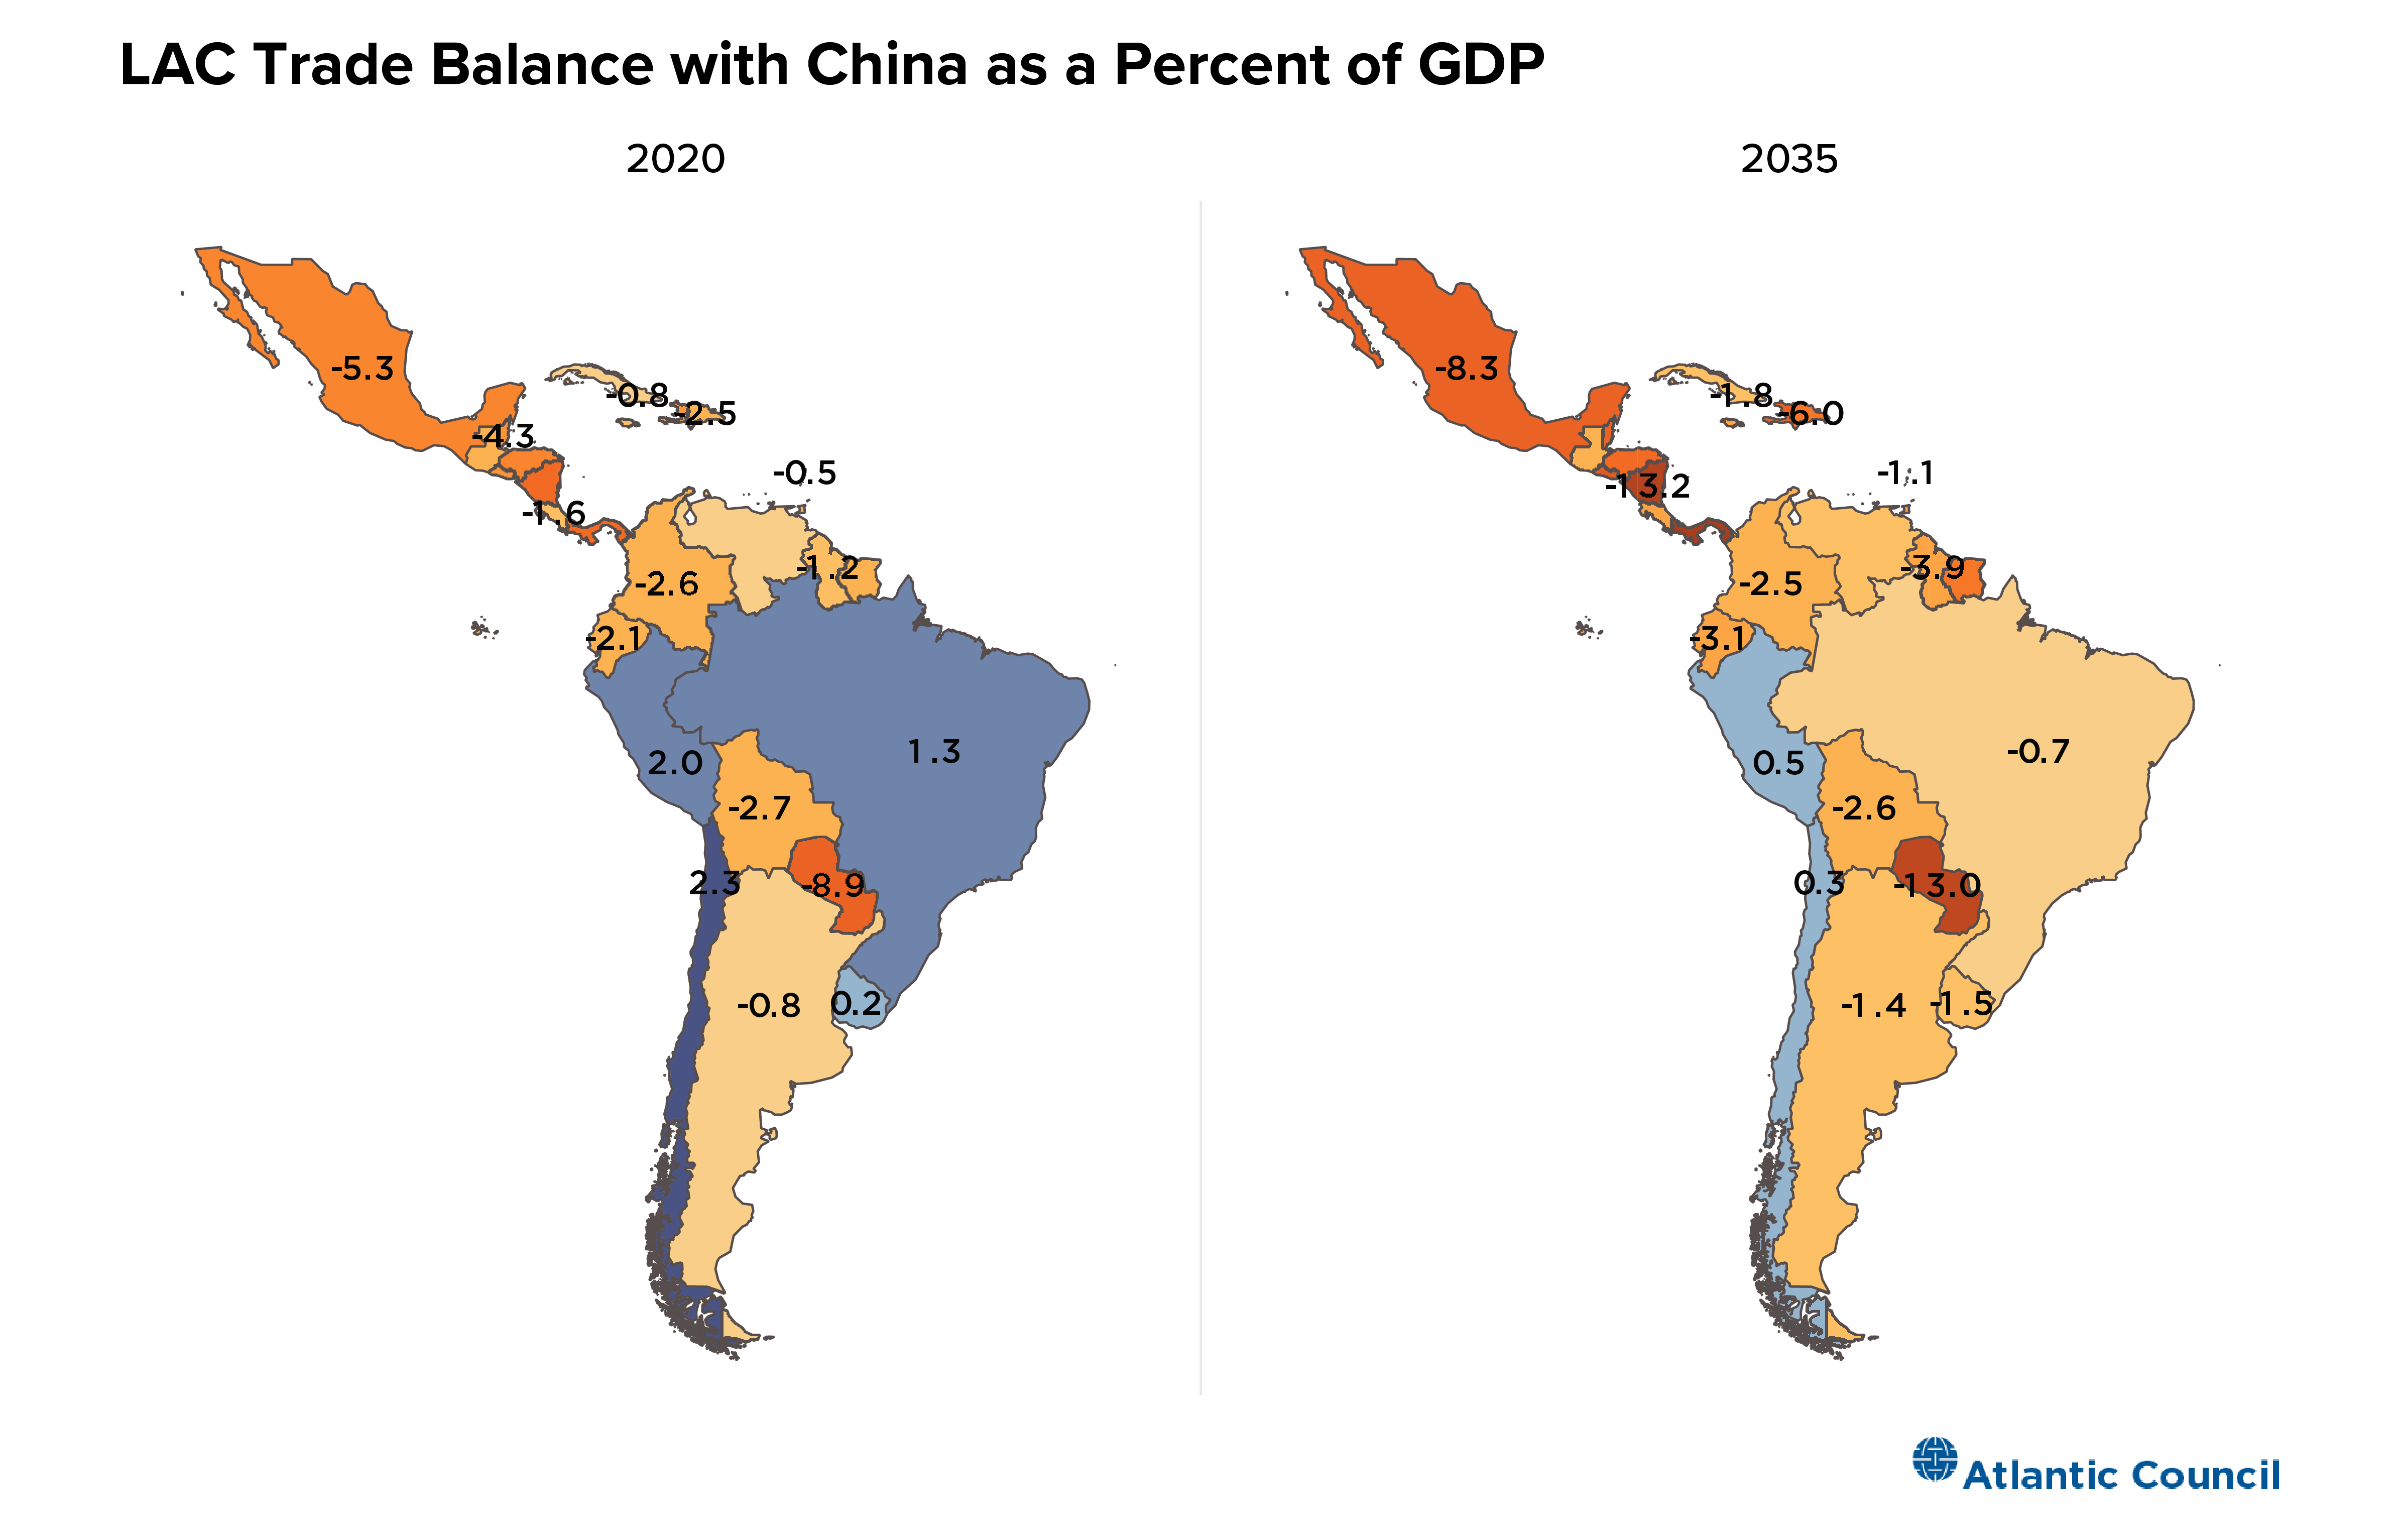 China’s trade with Latin America is bound to keep growing. Here’s why that matters